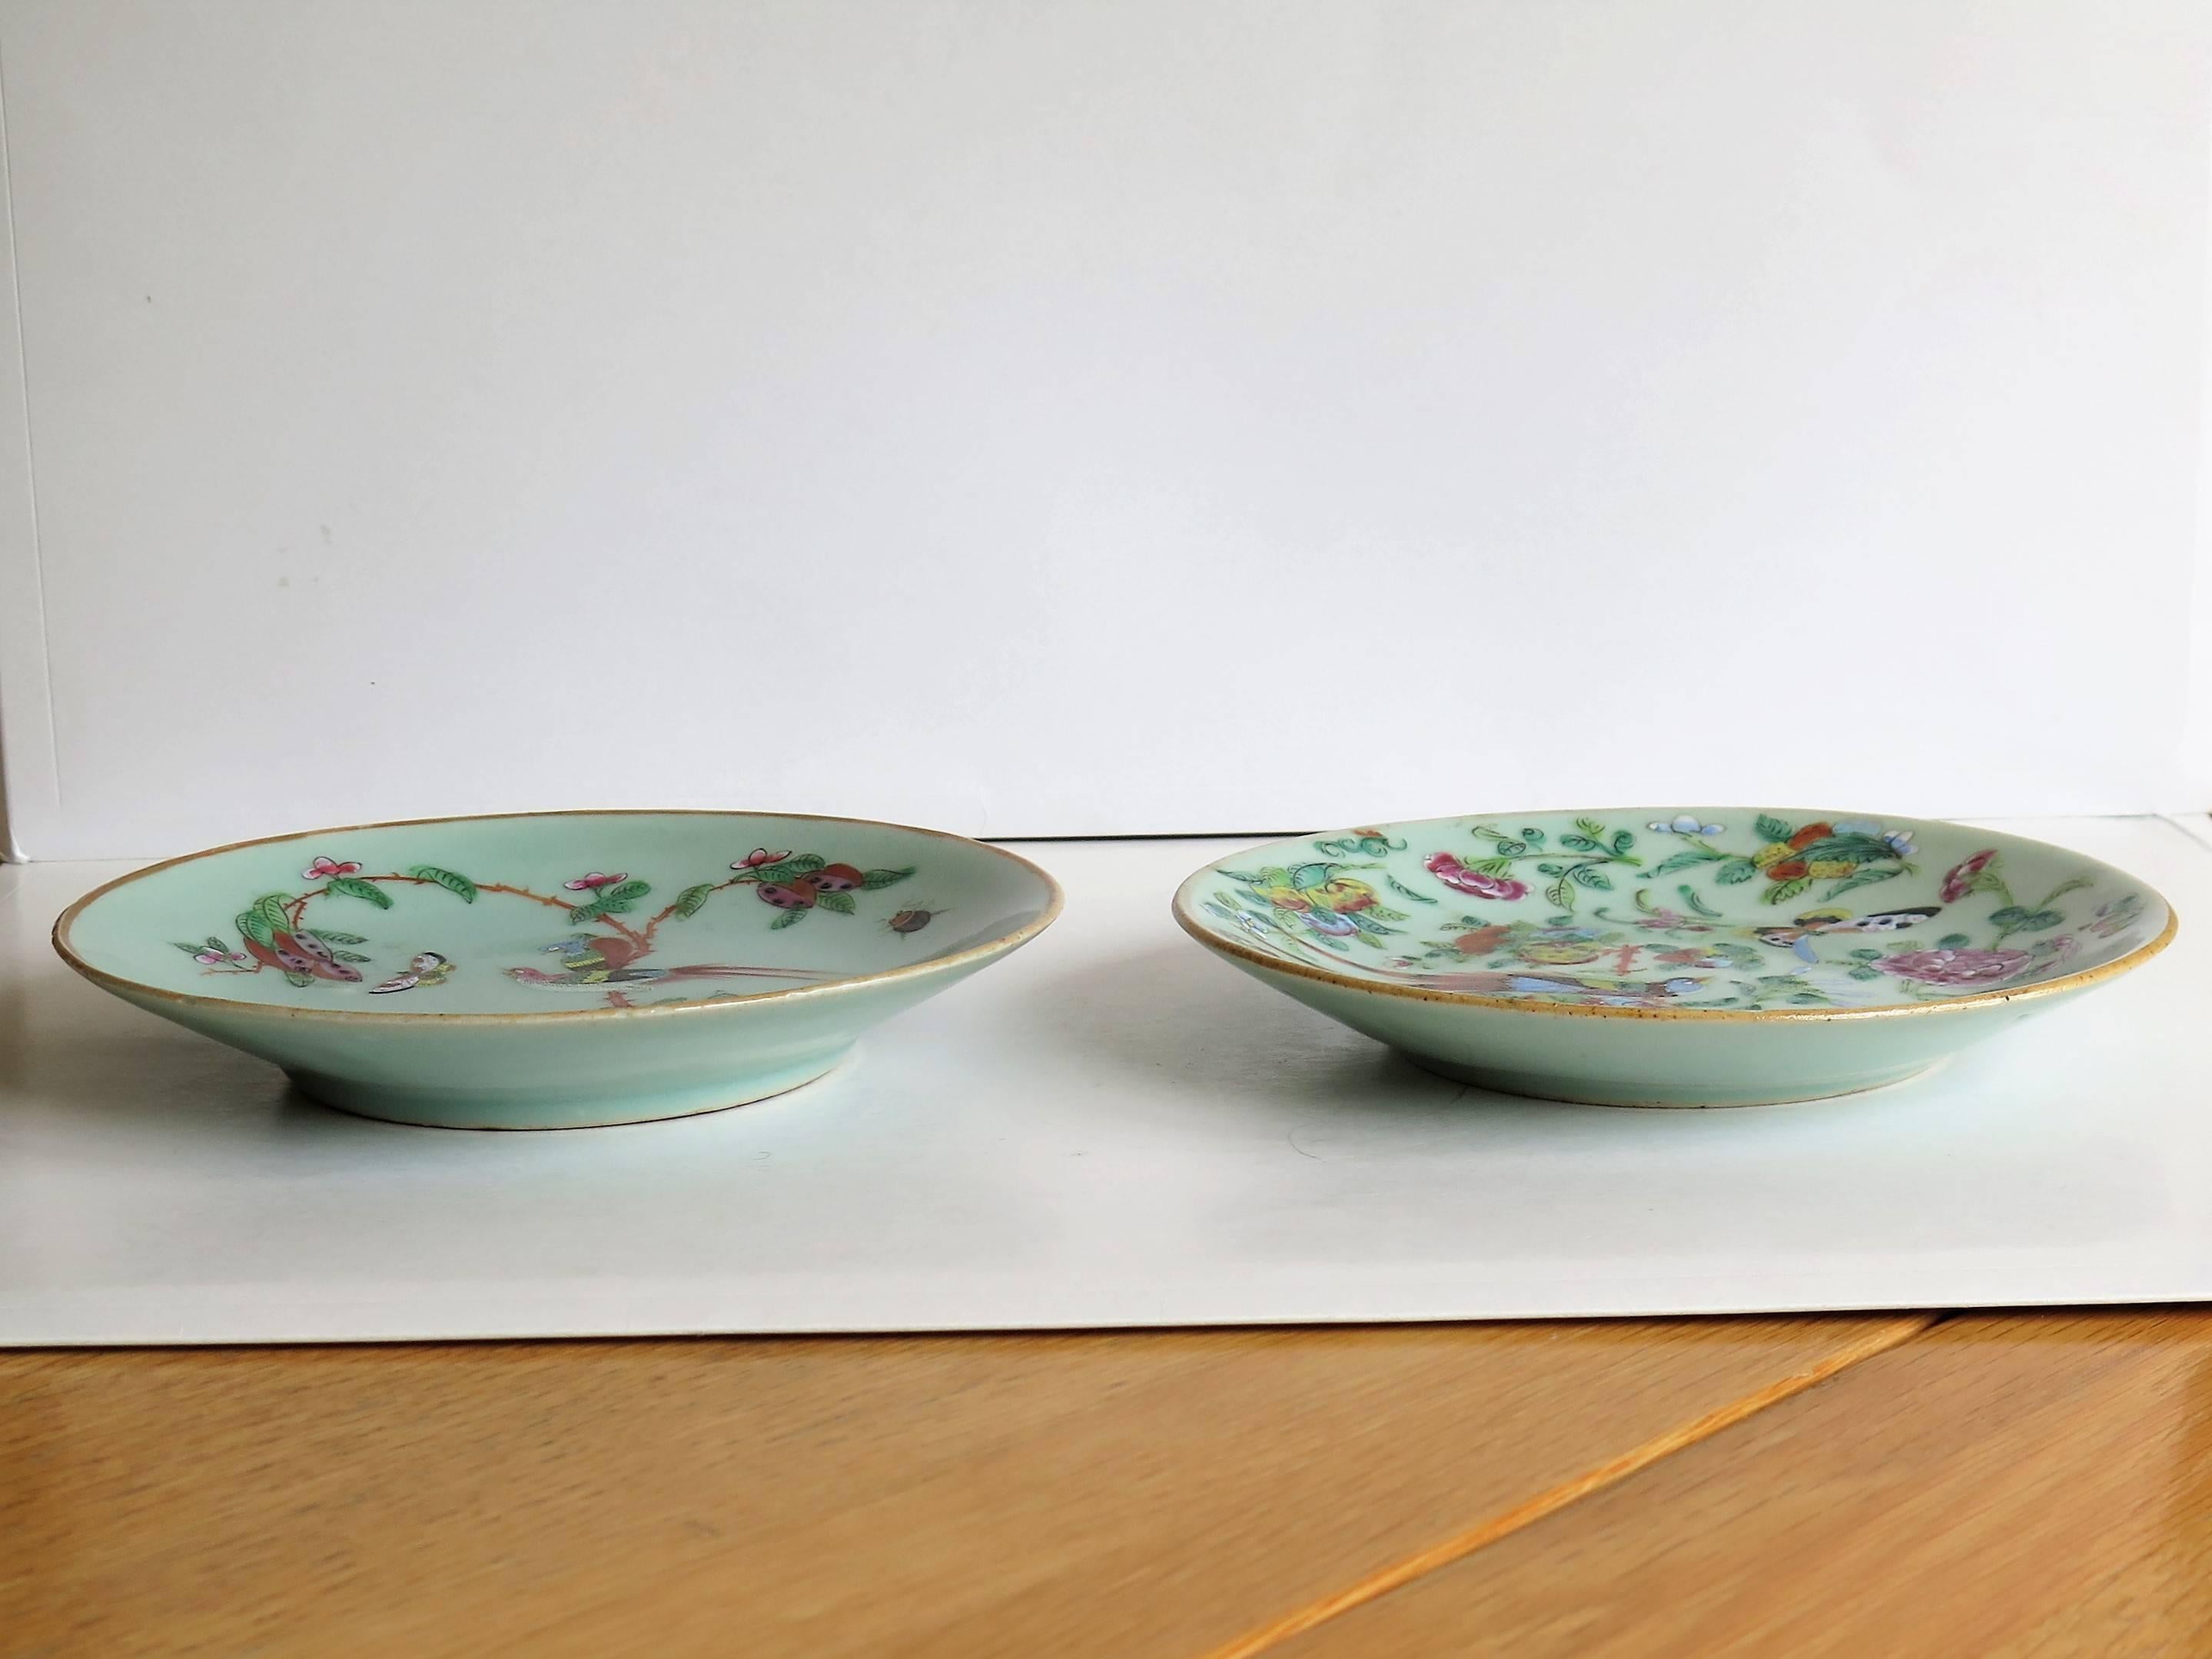 Two Chinese Plates, Porcelain, Celadon, Birds and Butterflies, Qing, circa 1830 2